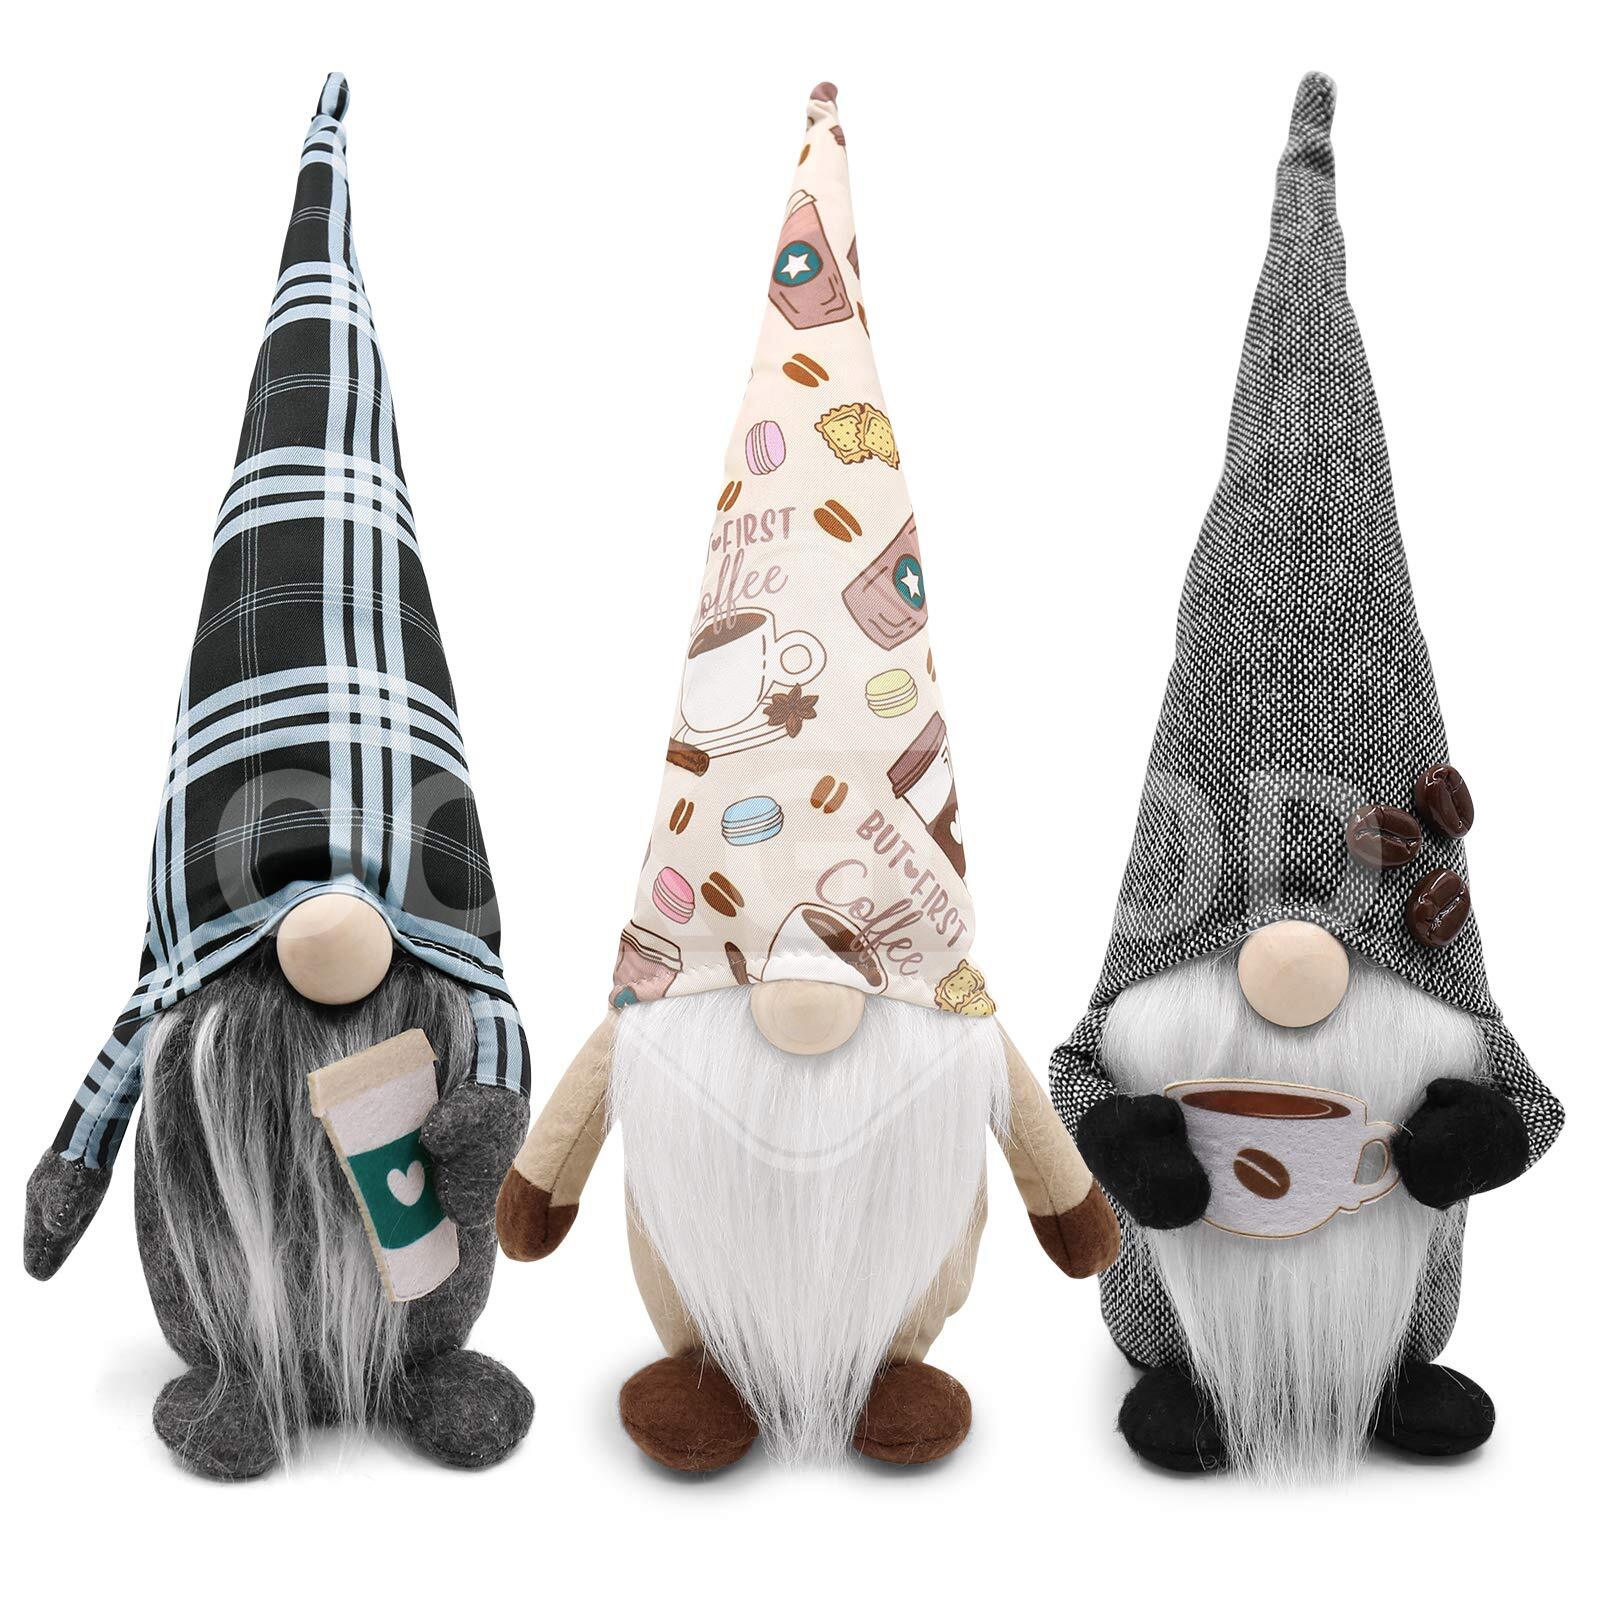 Lovely Plush Coffee Gnome Doll For Novelty Gift And Decoration